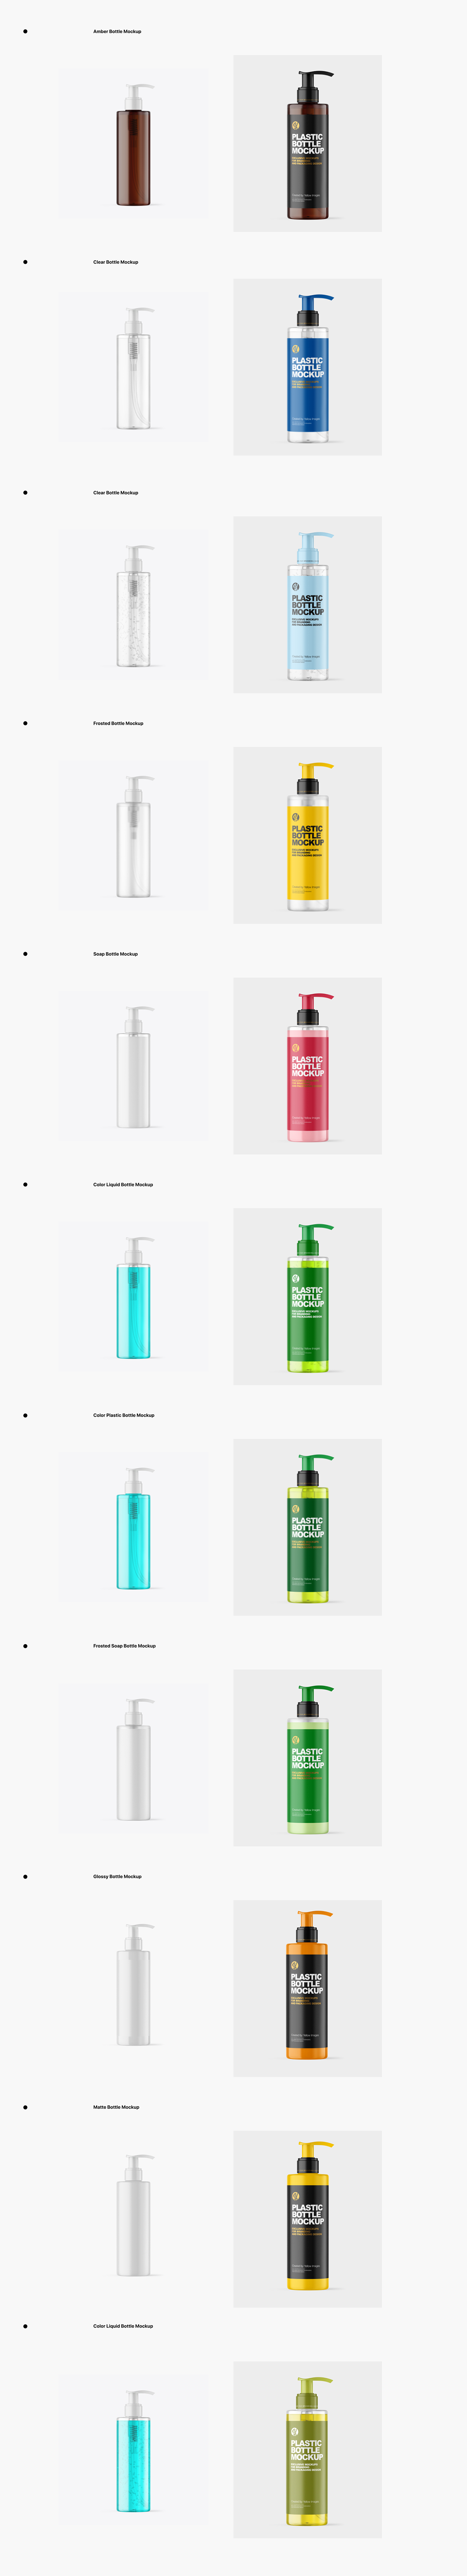 Download 200 Ml Cosmetic Bottles With Pump Mockups Psd On Student Show Yellowimages Mockups